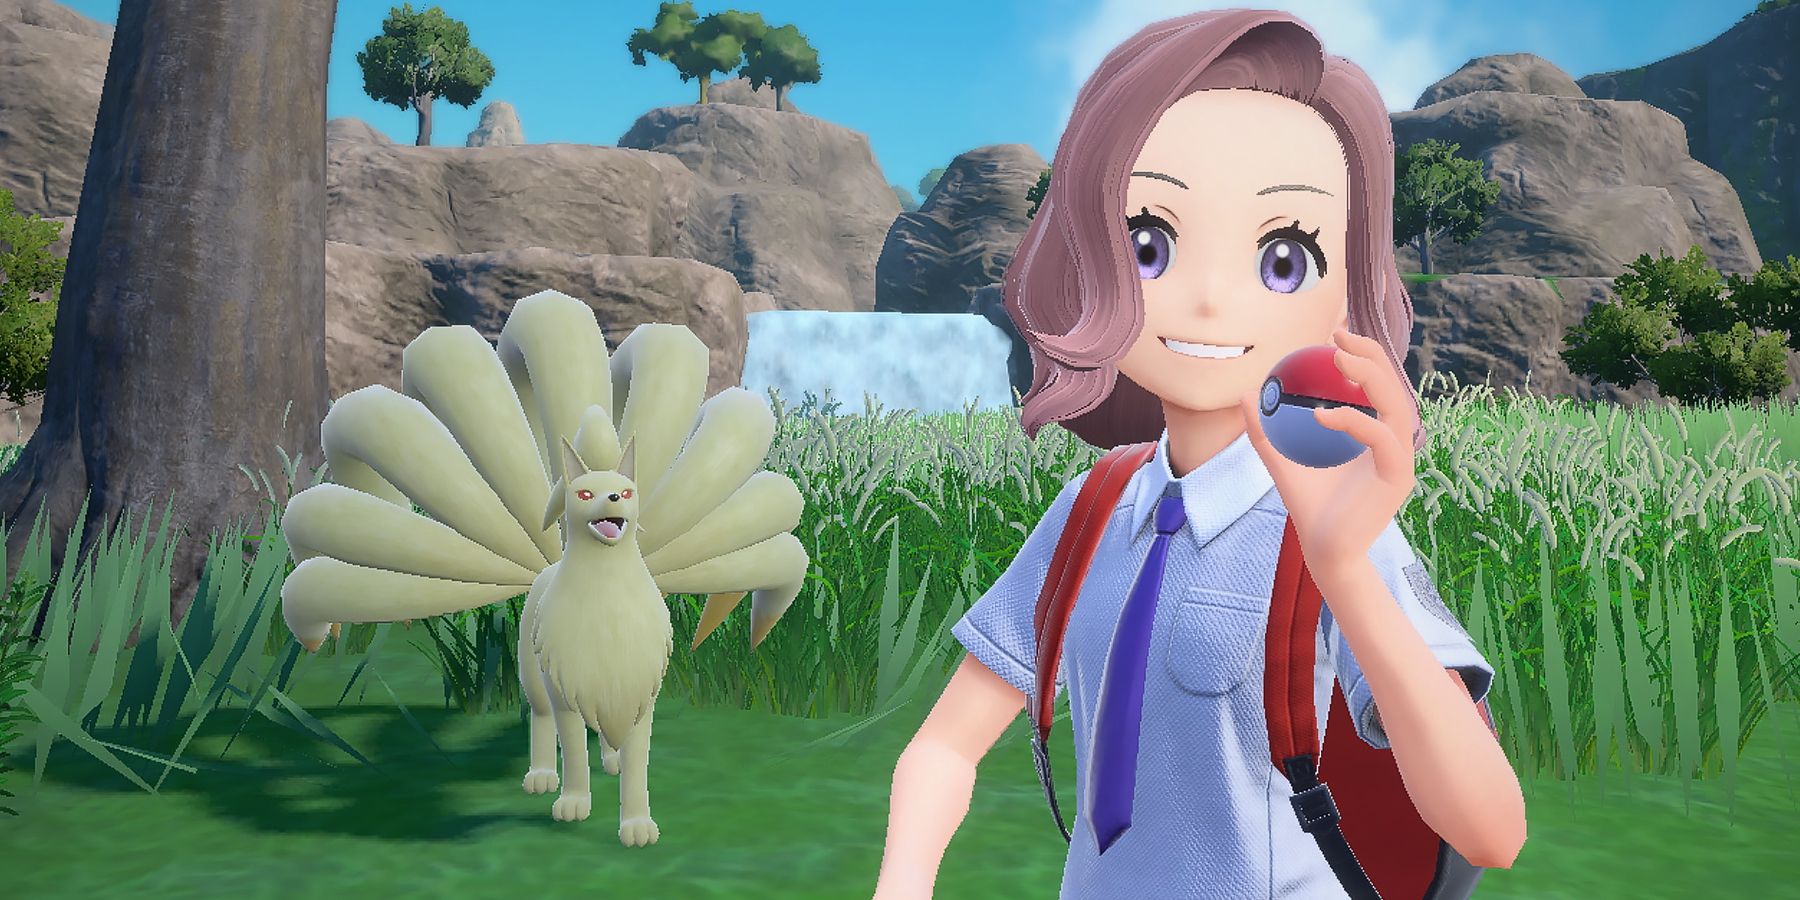 Pokemon Scarlet and Violet Drops Another Tease About Strange New Pokemon